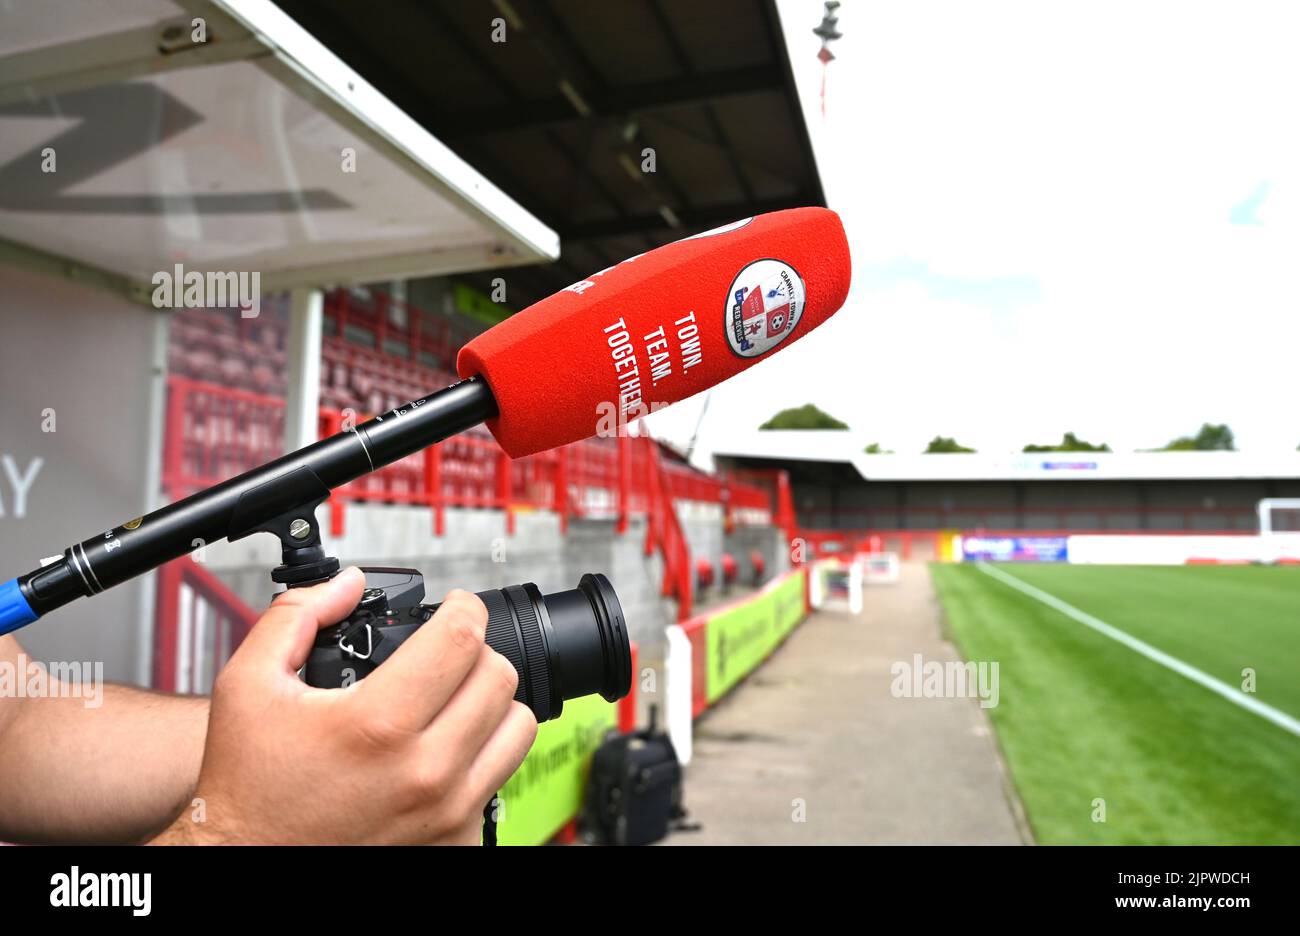 Ready for the the EFL League Two match between Crawley Town and AFC Wimbledon at the Broadfield Stadium  , Crawley ,  UK - 20th August 2022 Editorial use only. No merchandising. For Football images FA and Premier League restrictions apply inc. no internet/mobile usage without FAPL license - for details contact Football Dataco Stock Photo